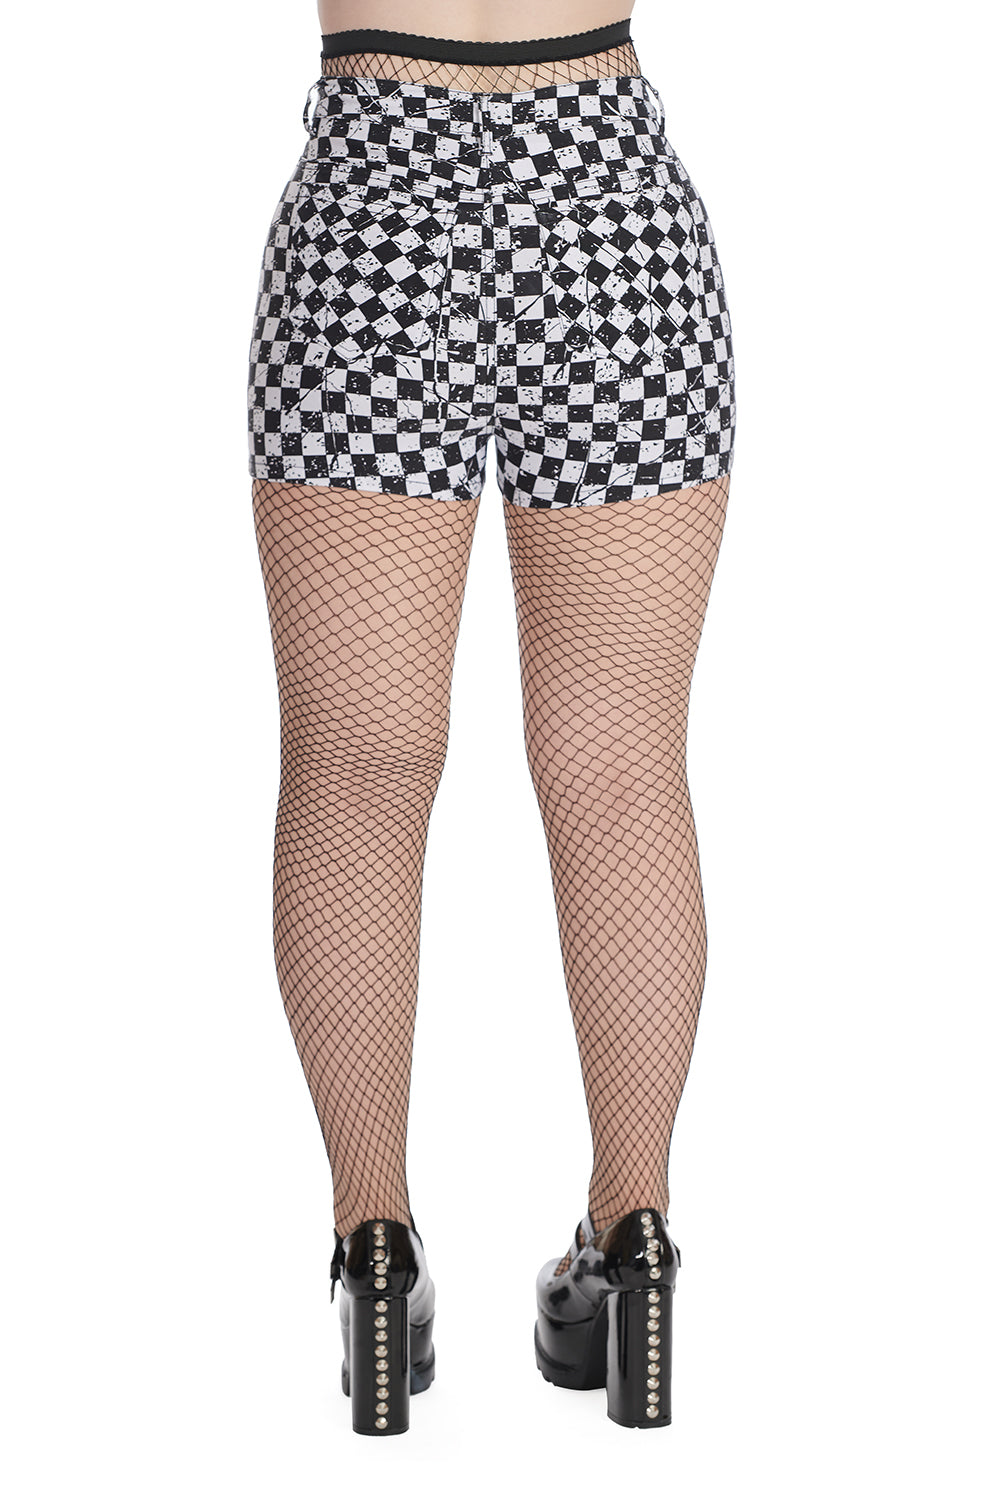 Banned Alternative CHECKERS SHORTS